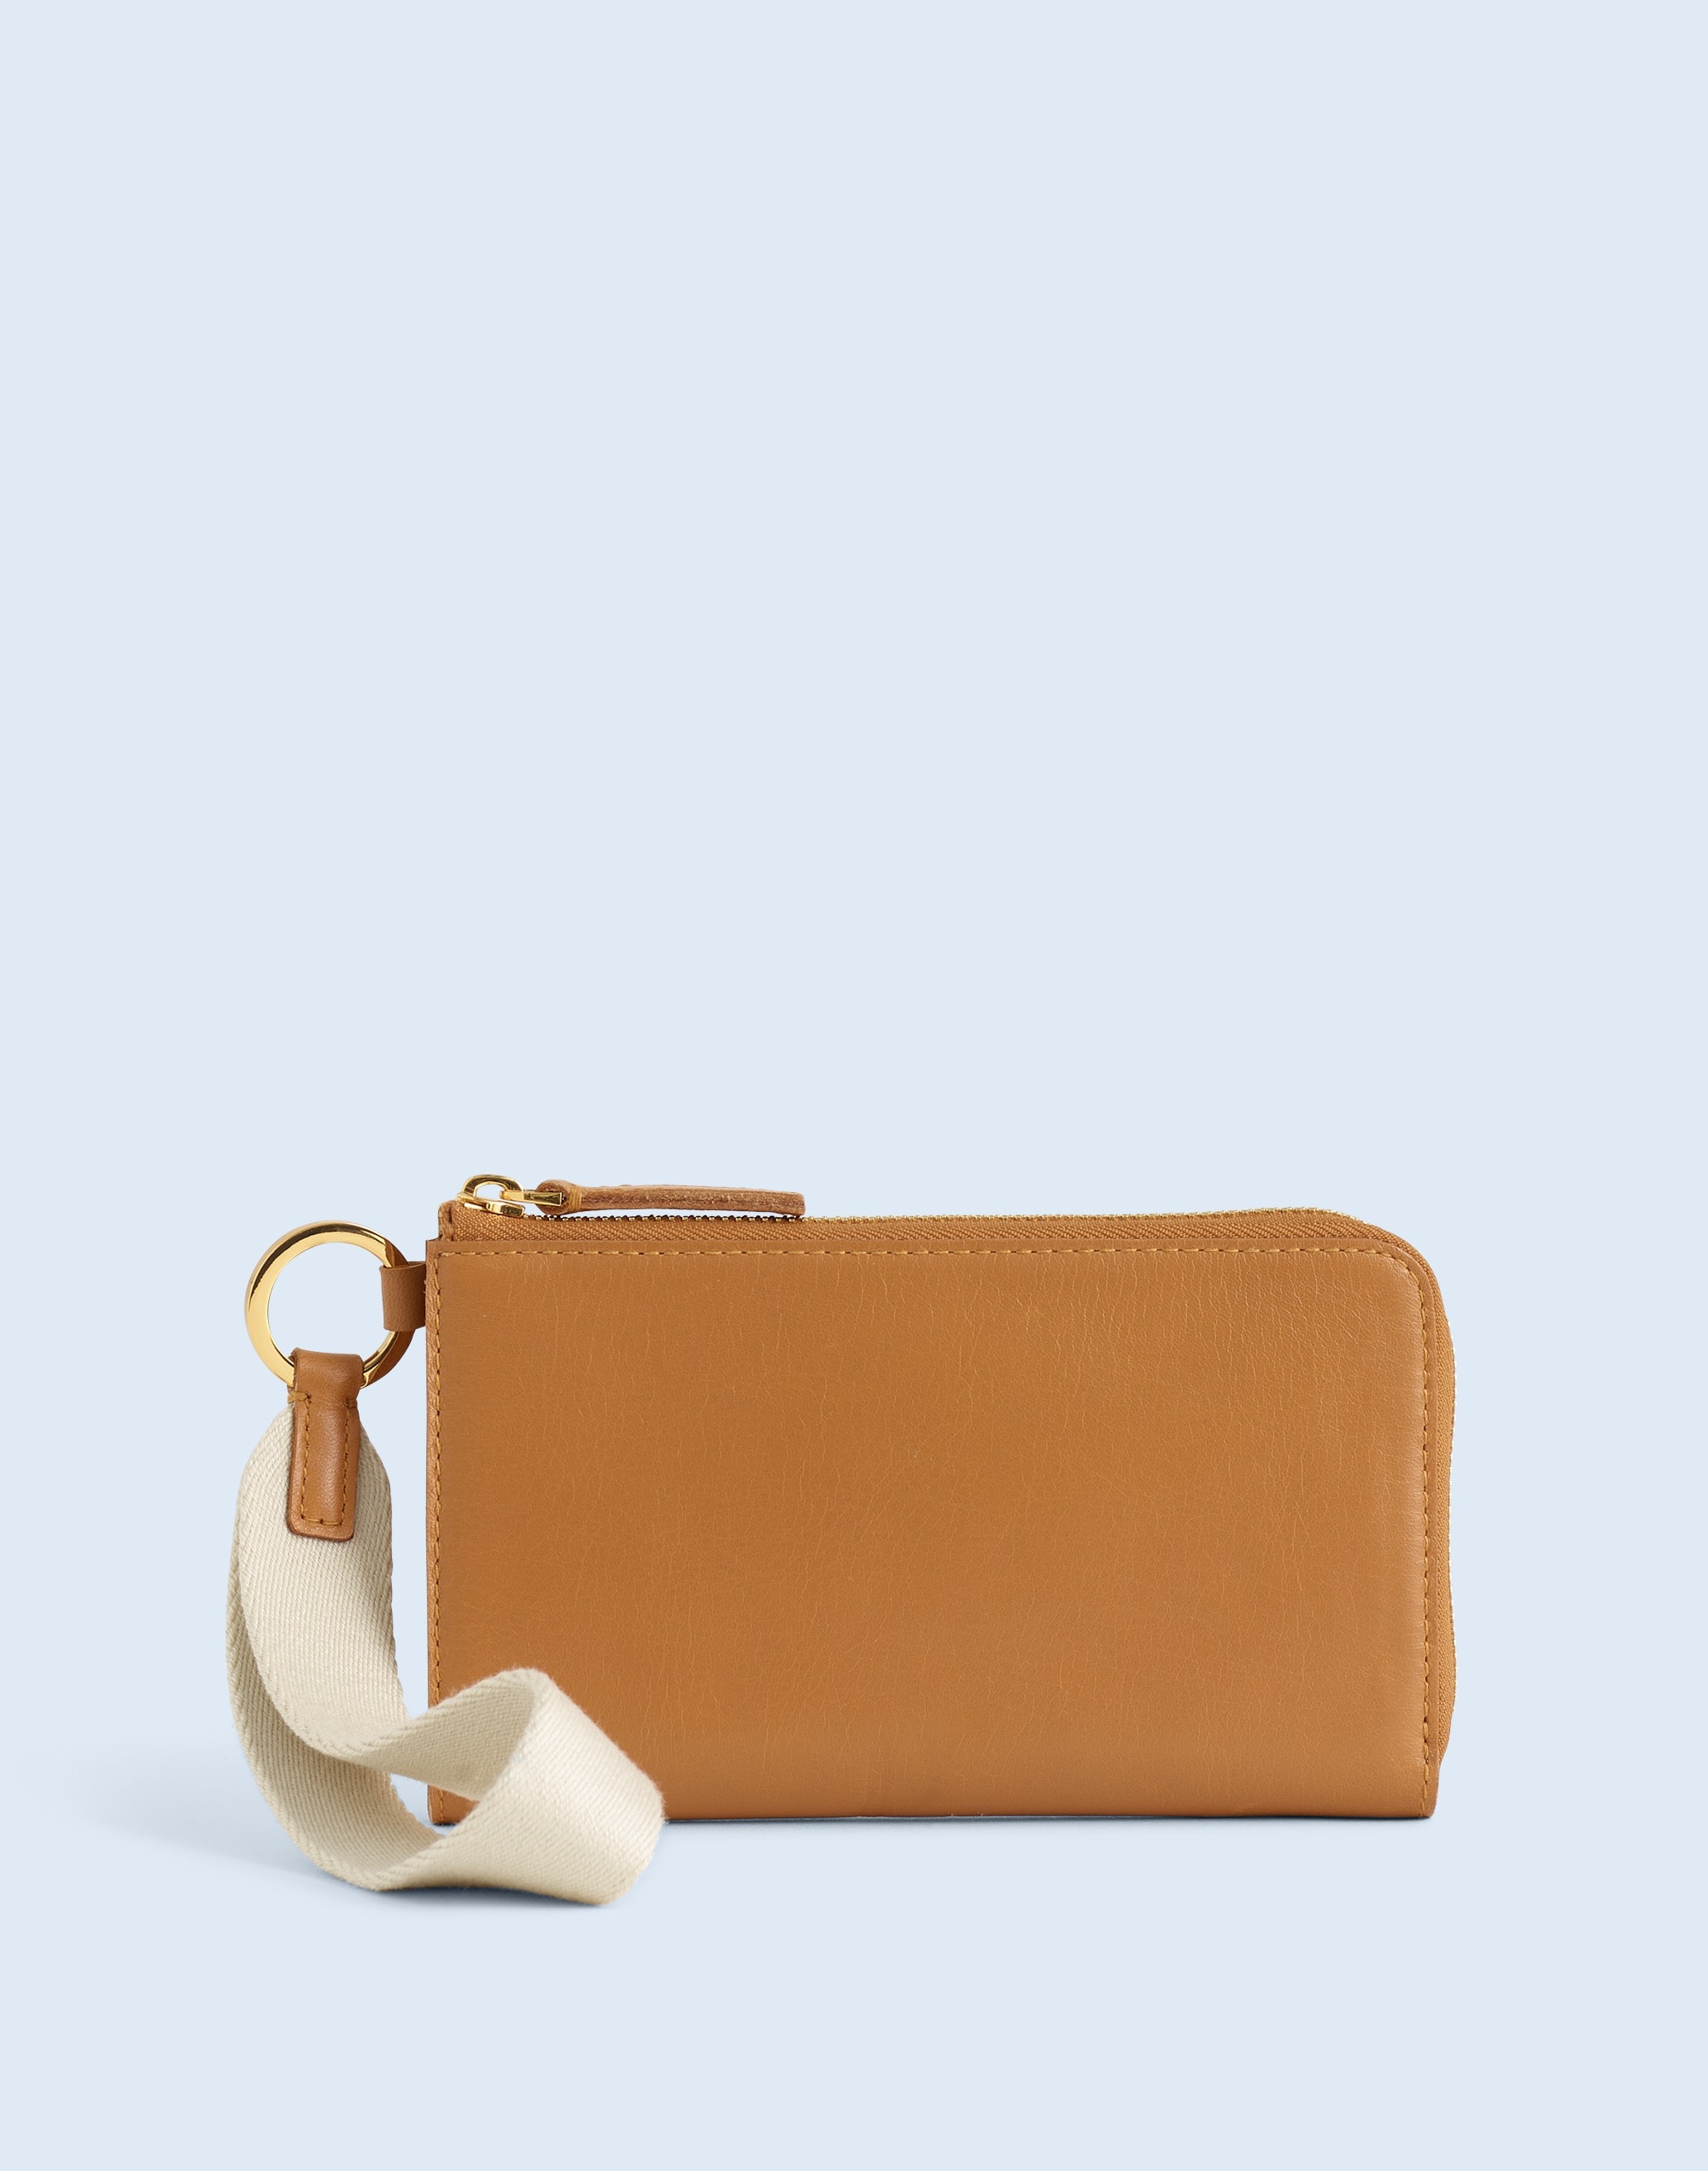 Mw The Essential Zip Clutch In Sunbaked Tan